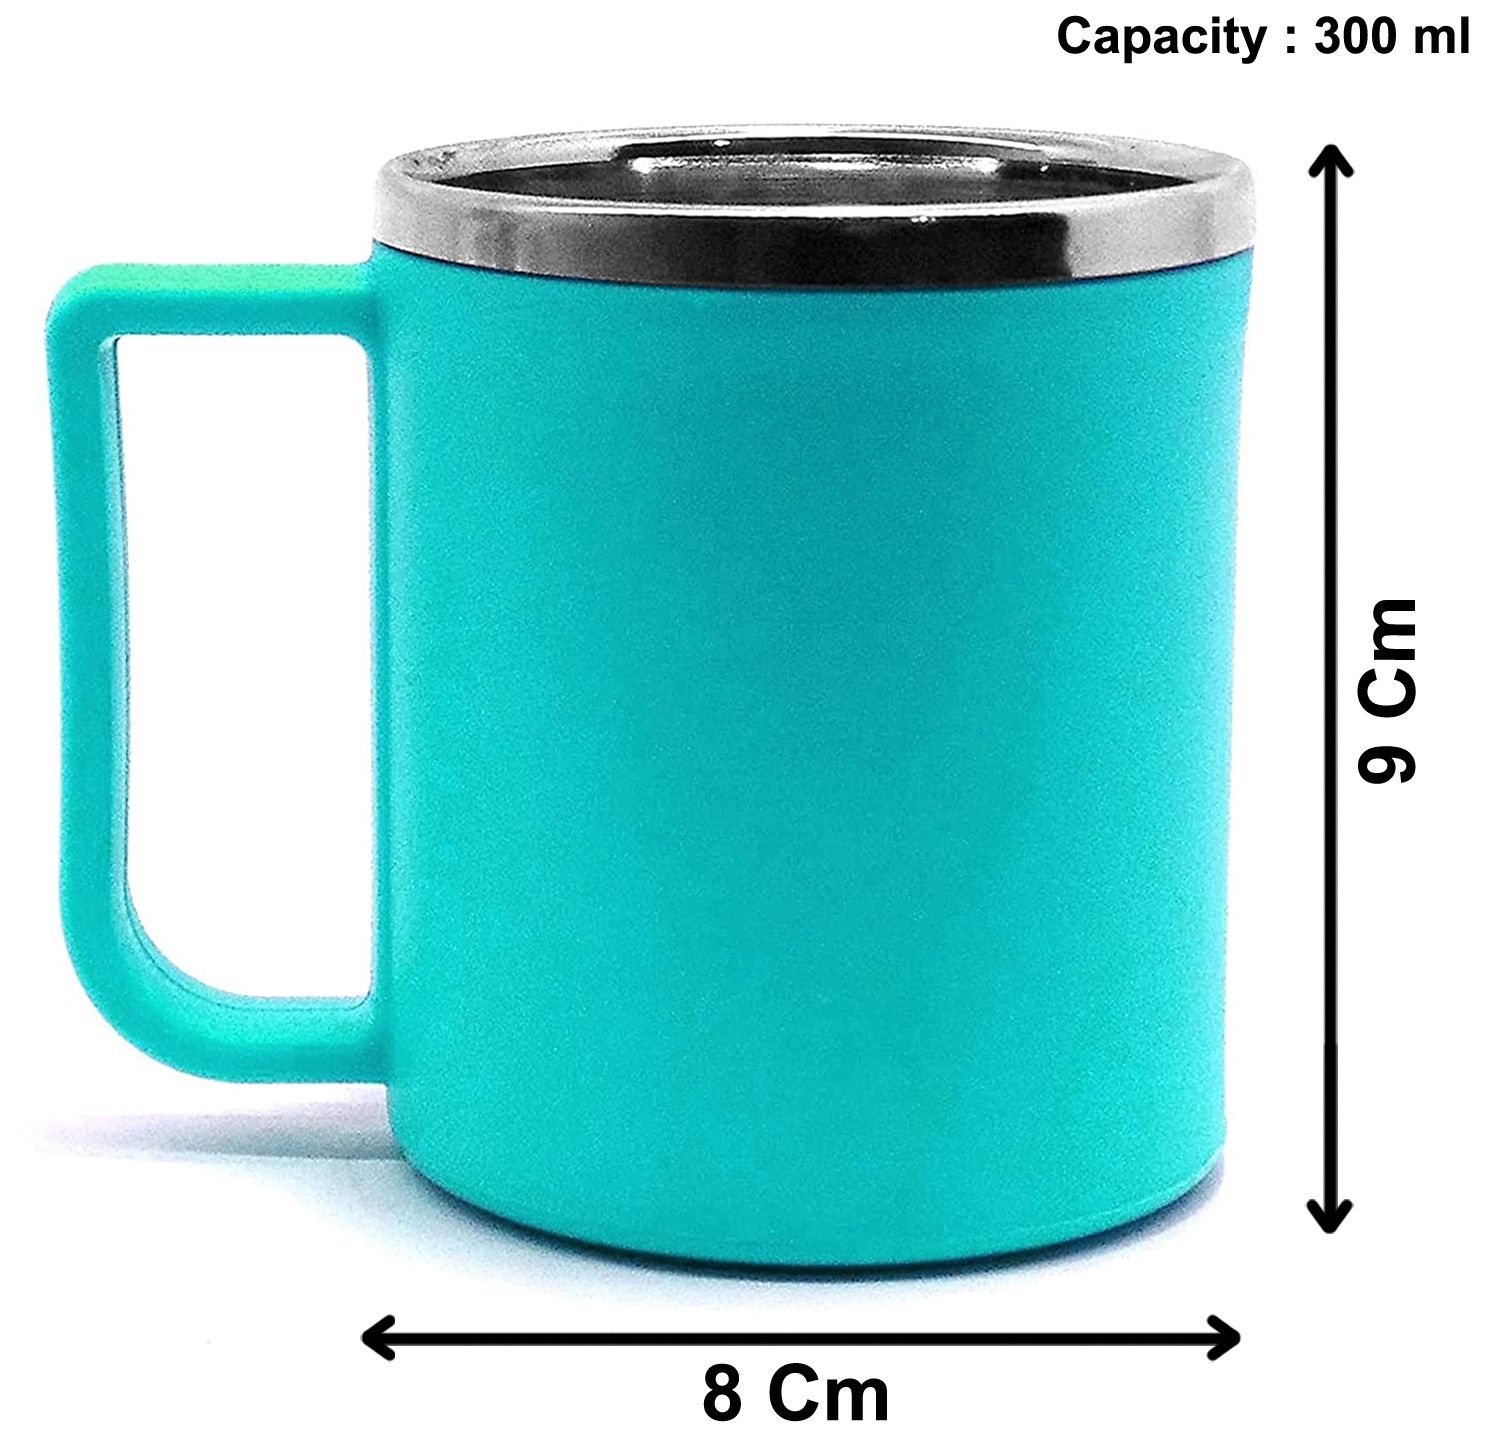 Kuber Industries Medium Size Plastic Steel Cups for Coffee Tea Cocoa, Camping Mugs with Handle, Portable & Easy Clean,(Green)